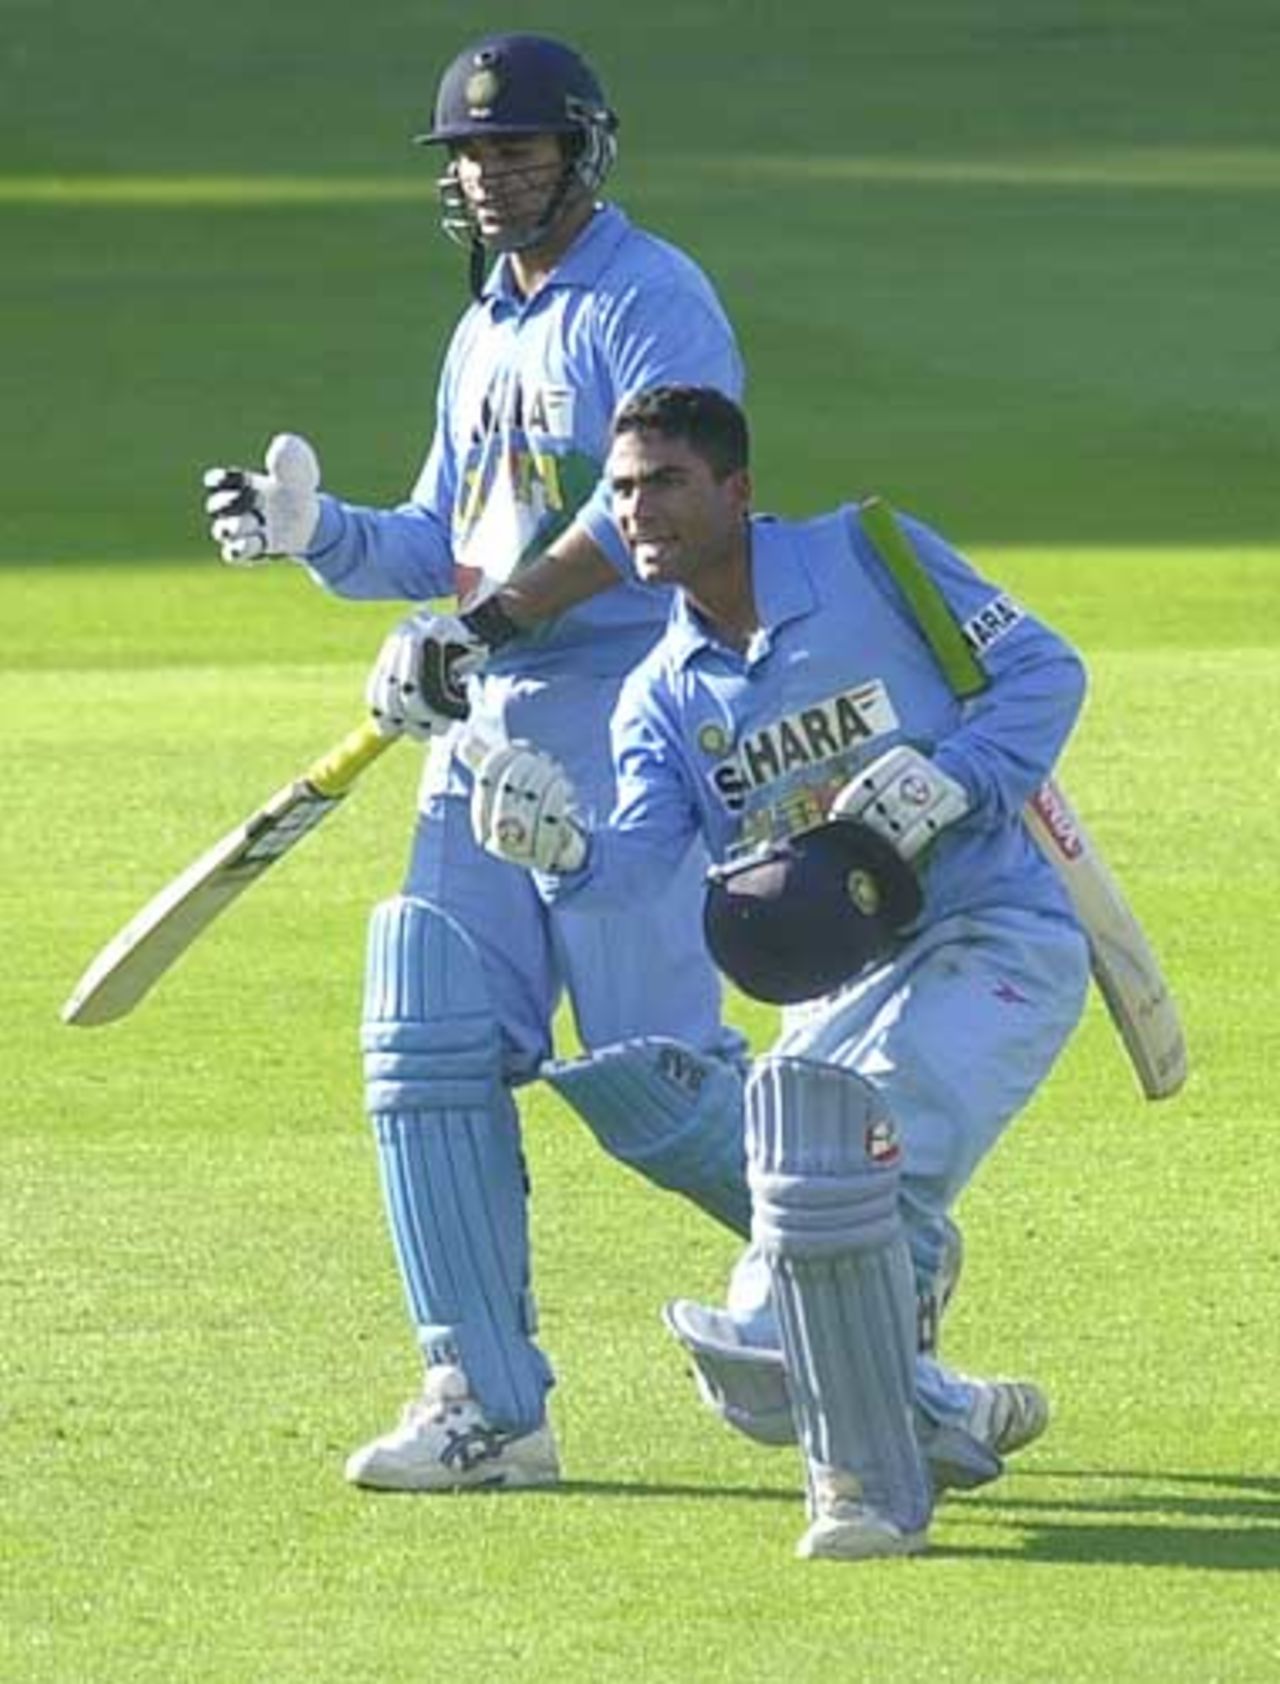 Khan and Kaif begin to celebrate the Indian victory, NatWest Series Final at Lord's, 13th Jul 2002